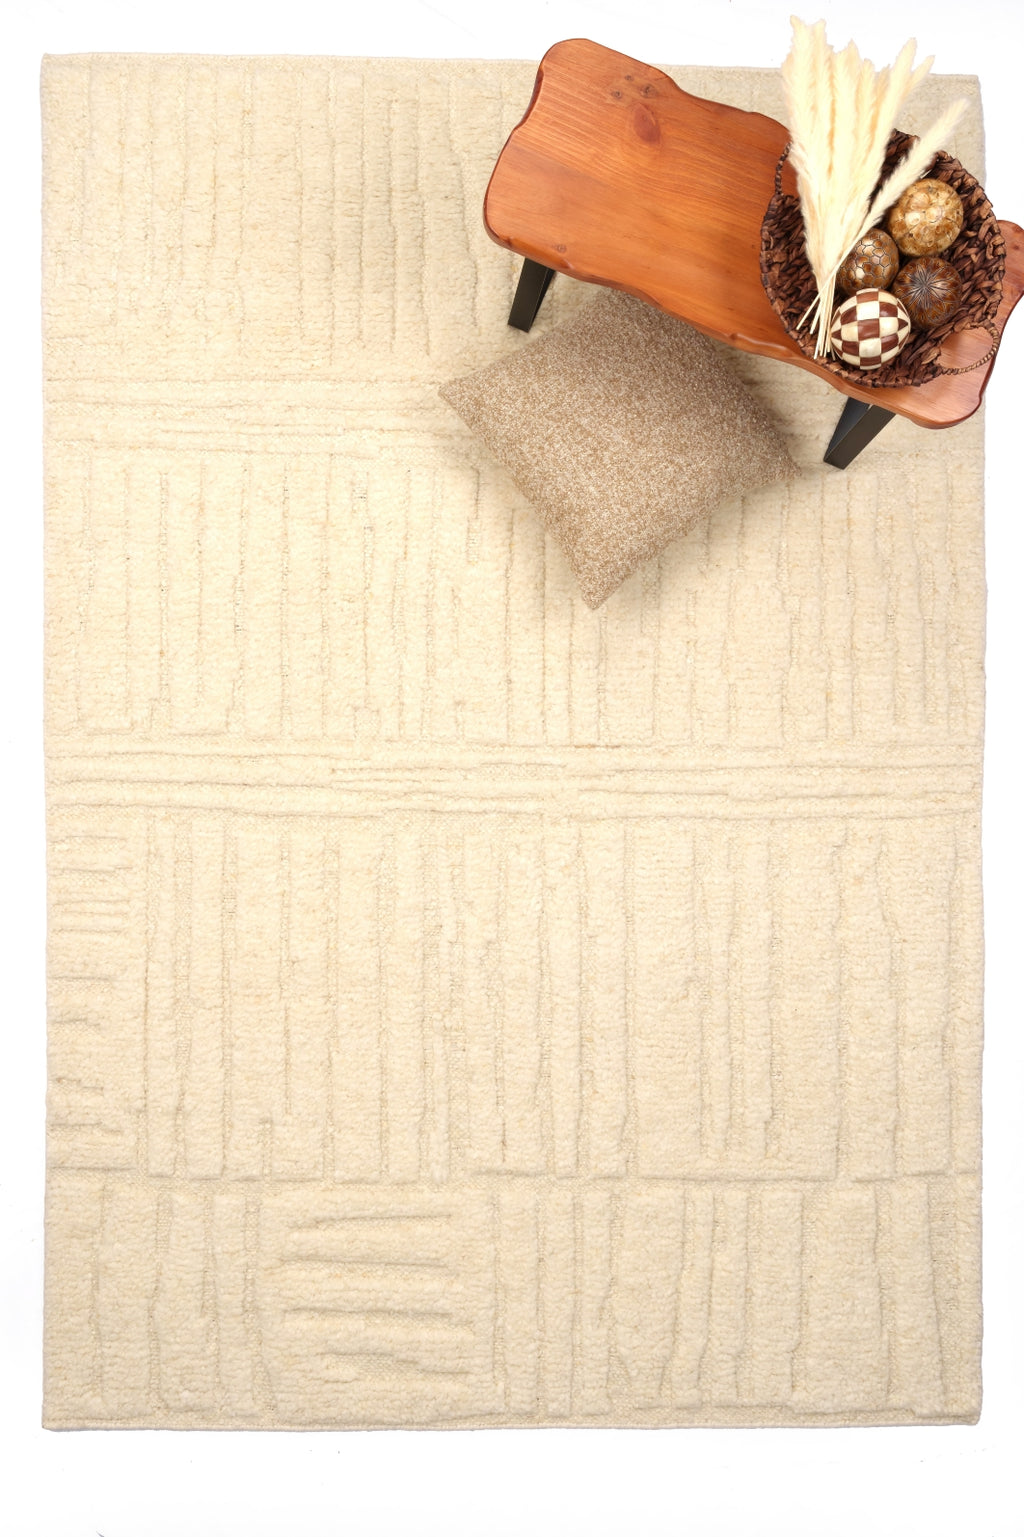 Capel Glenwood Springs 1800 Winter White 600 Area Rug Rectangle Roomshot Image 1 Feature